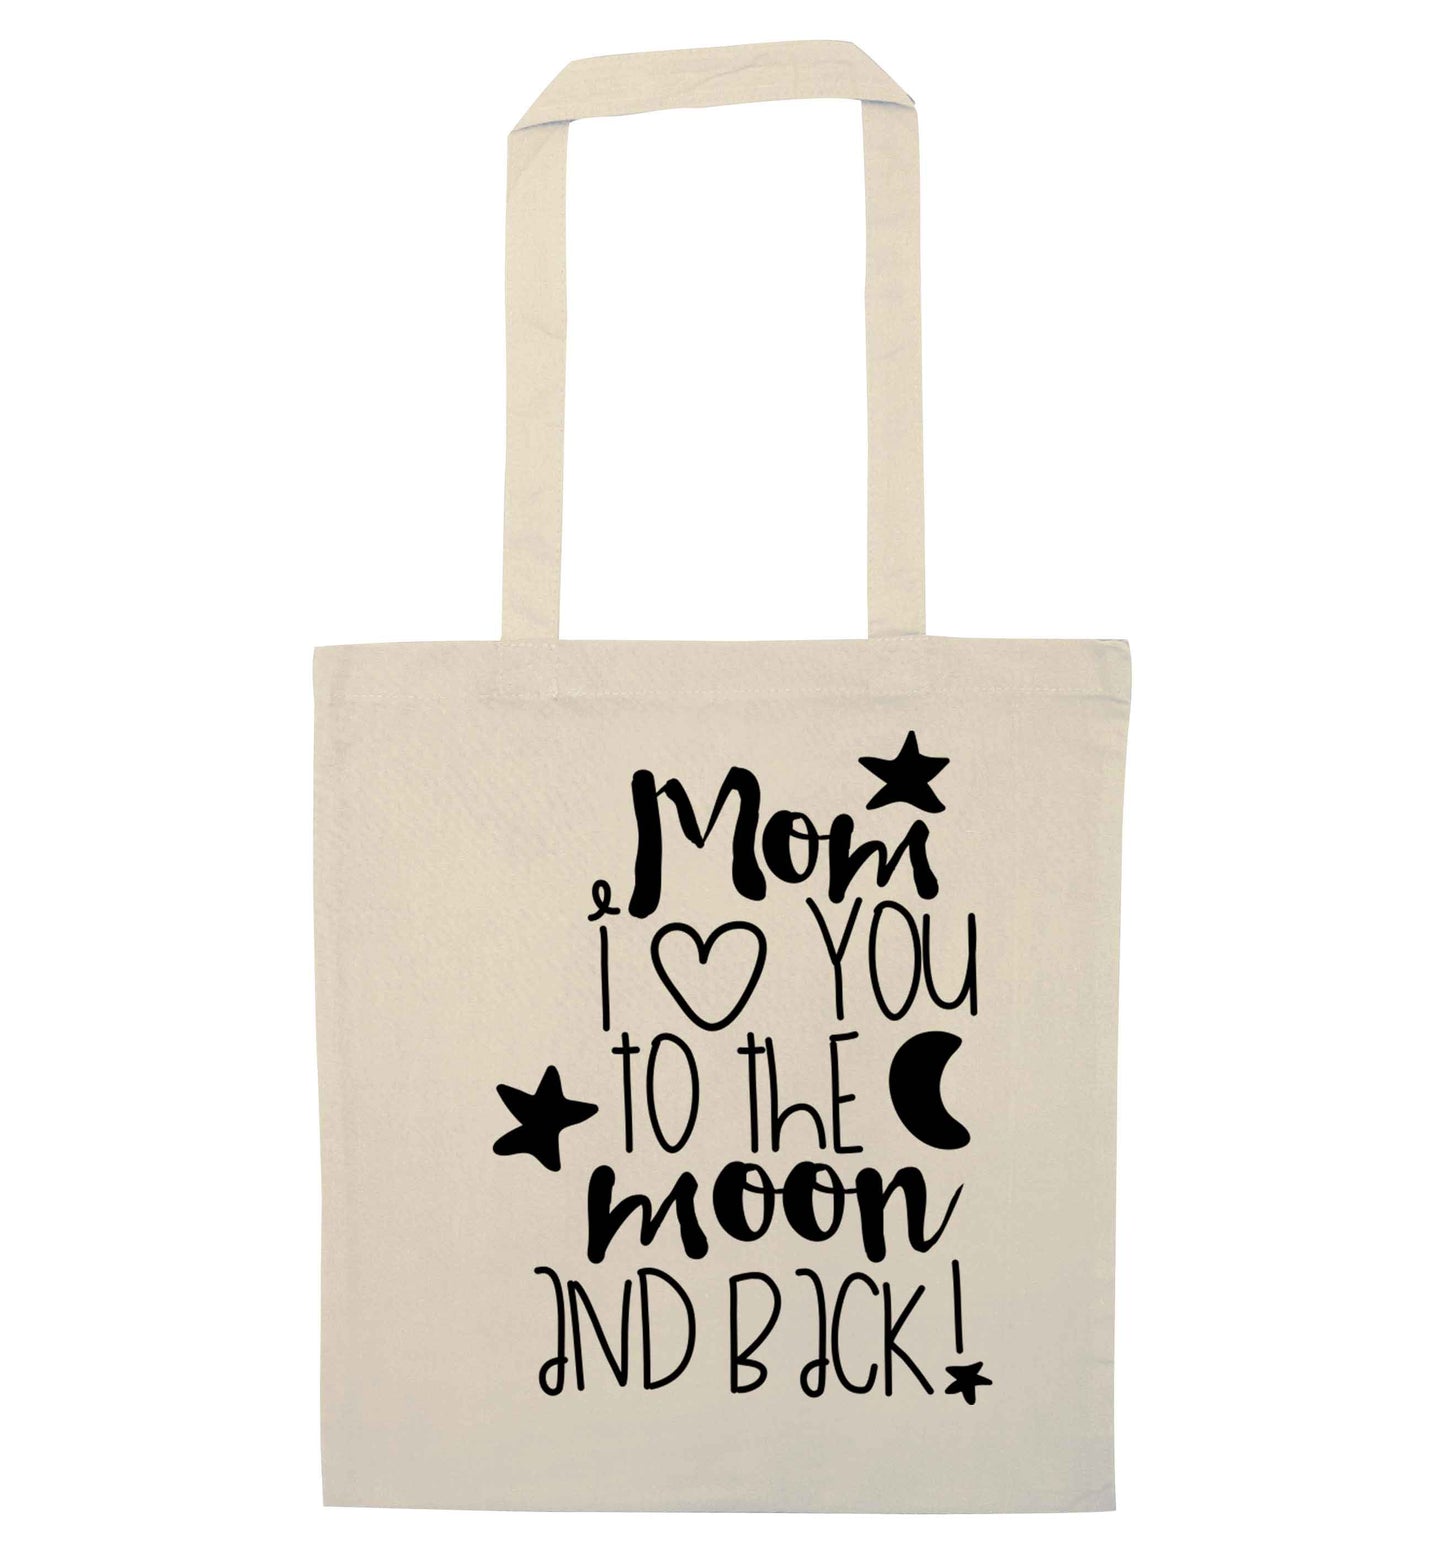 Mom I love you to the moon and back natural tote bag